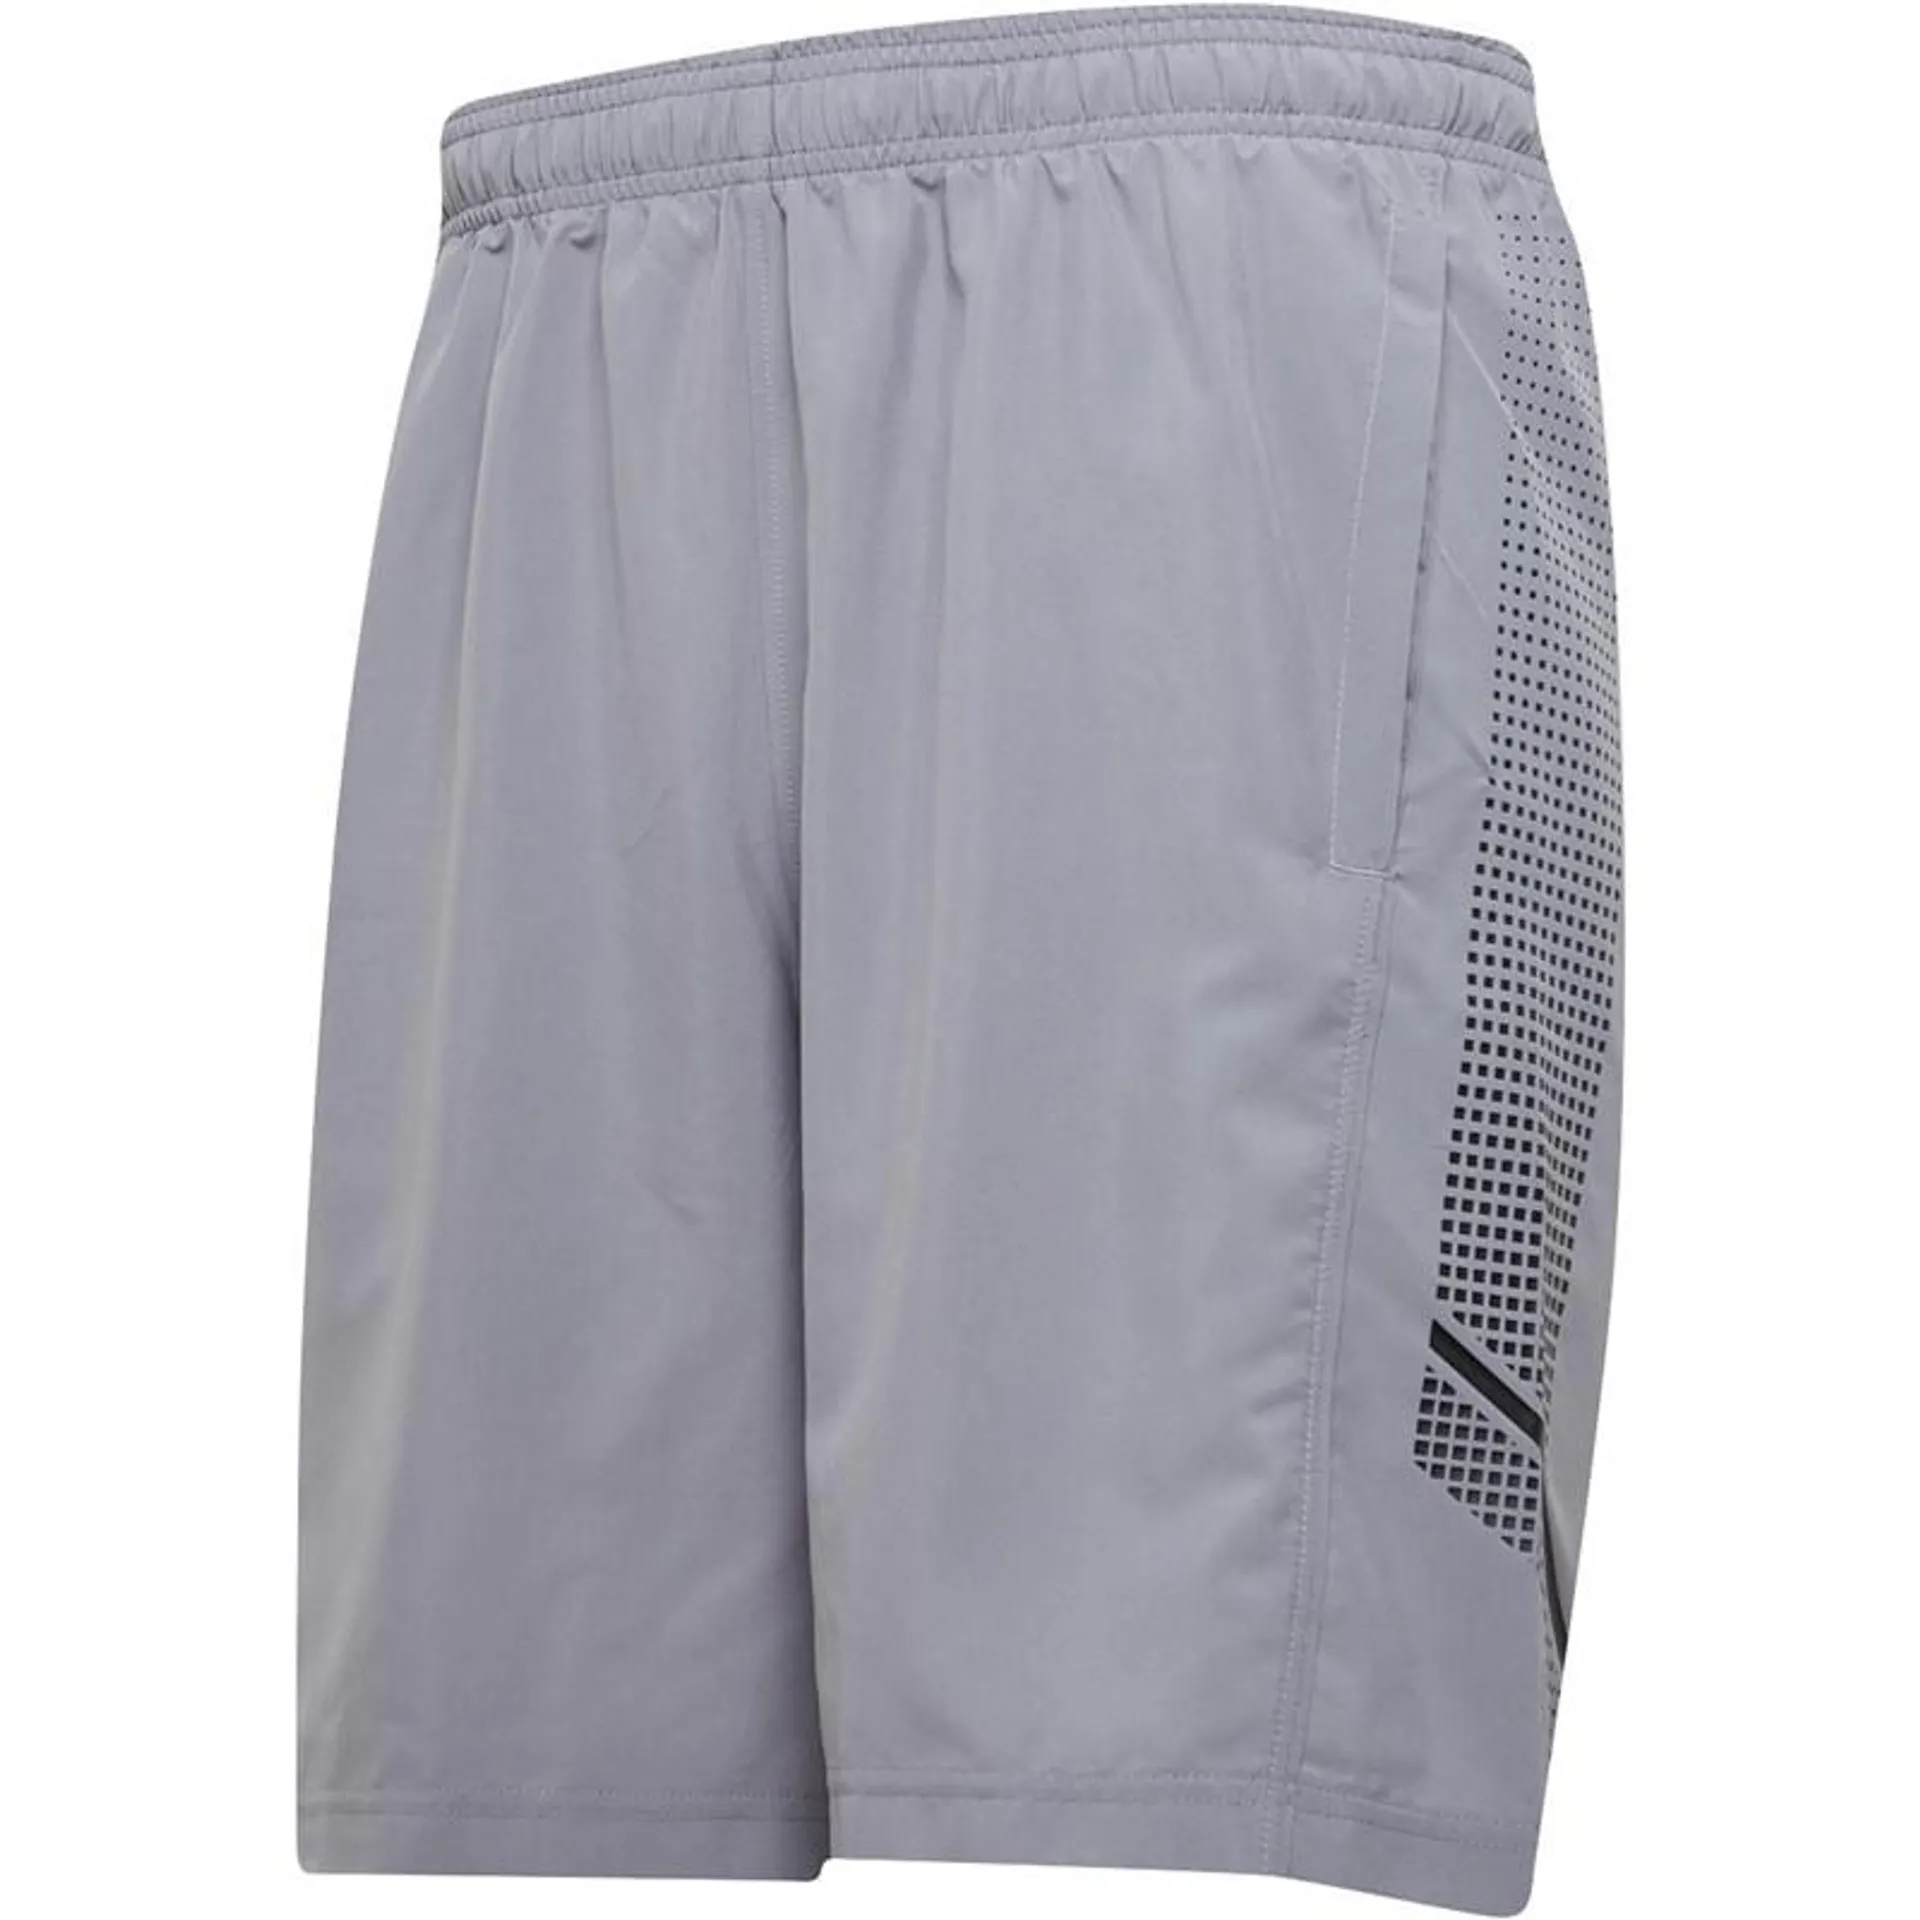 Under Armour Mens UA Woven Graphic Shorts Grey